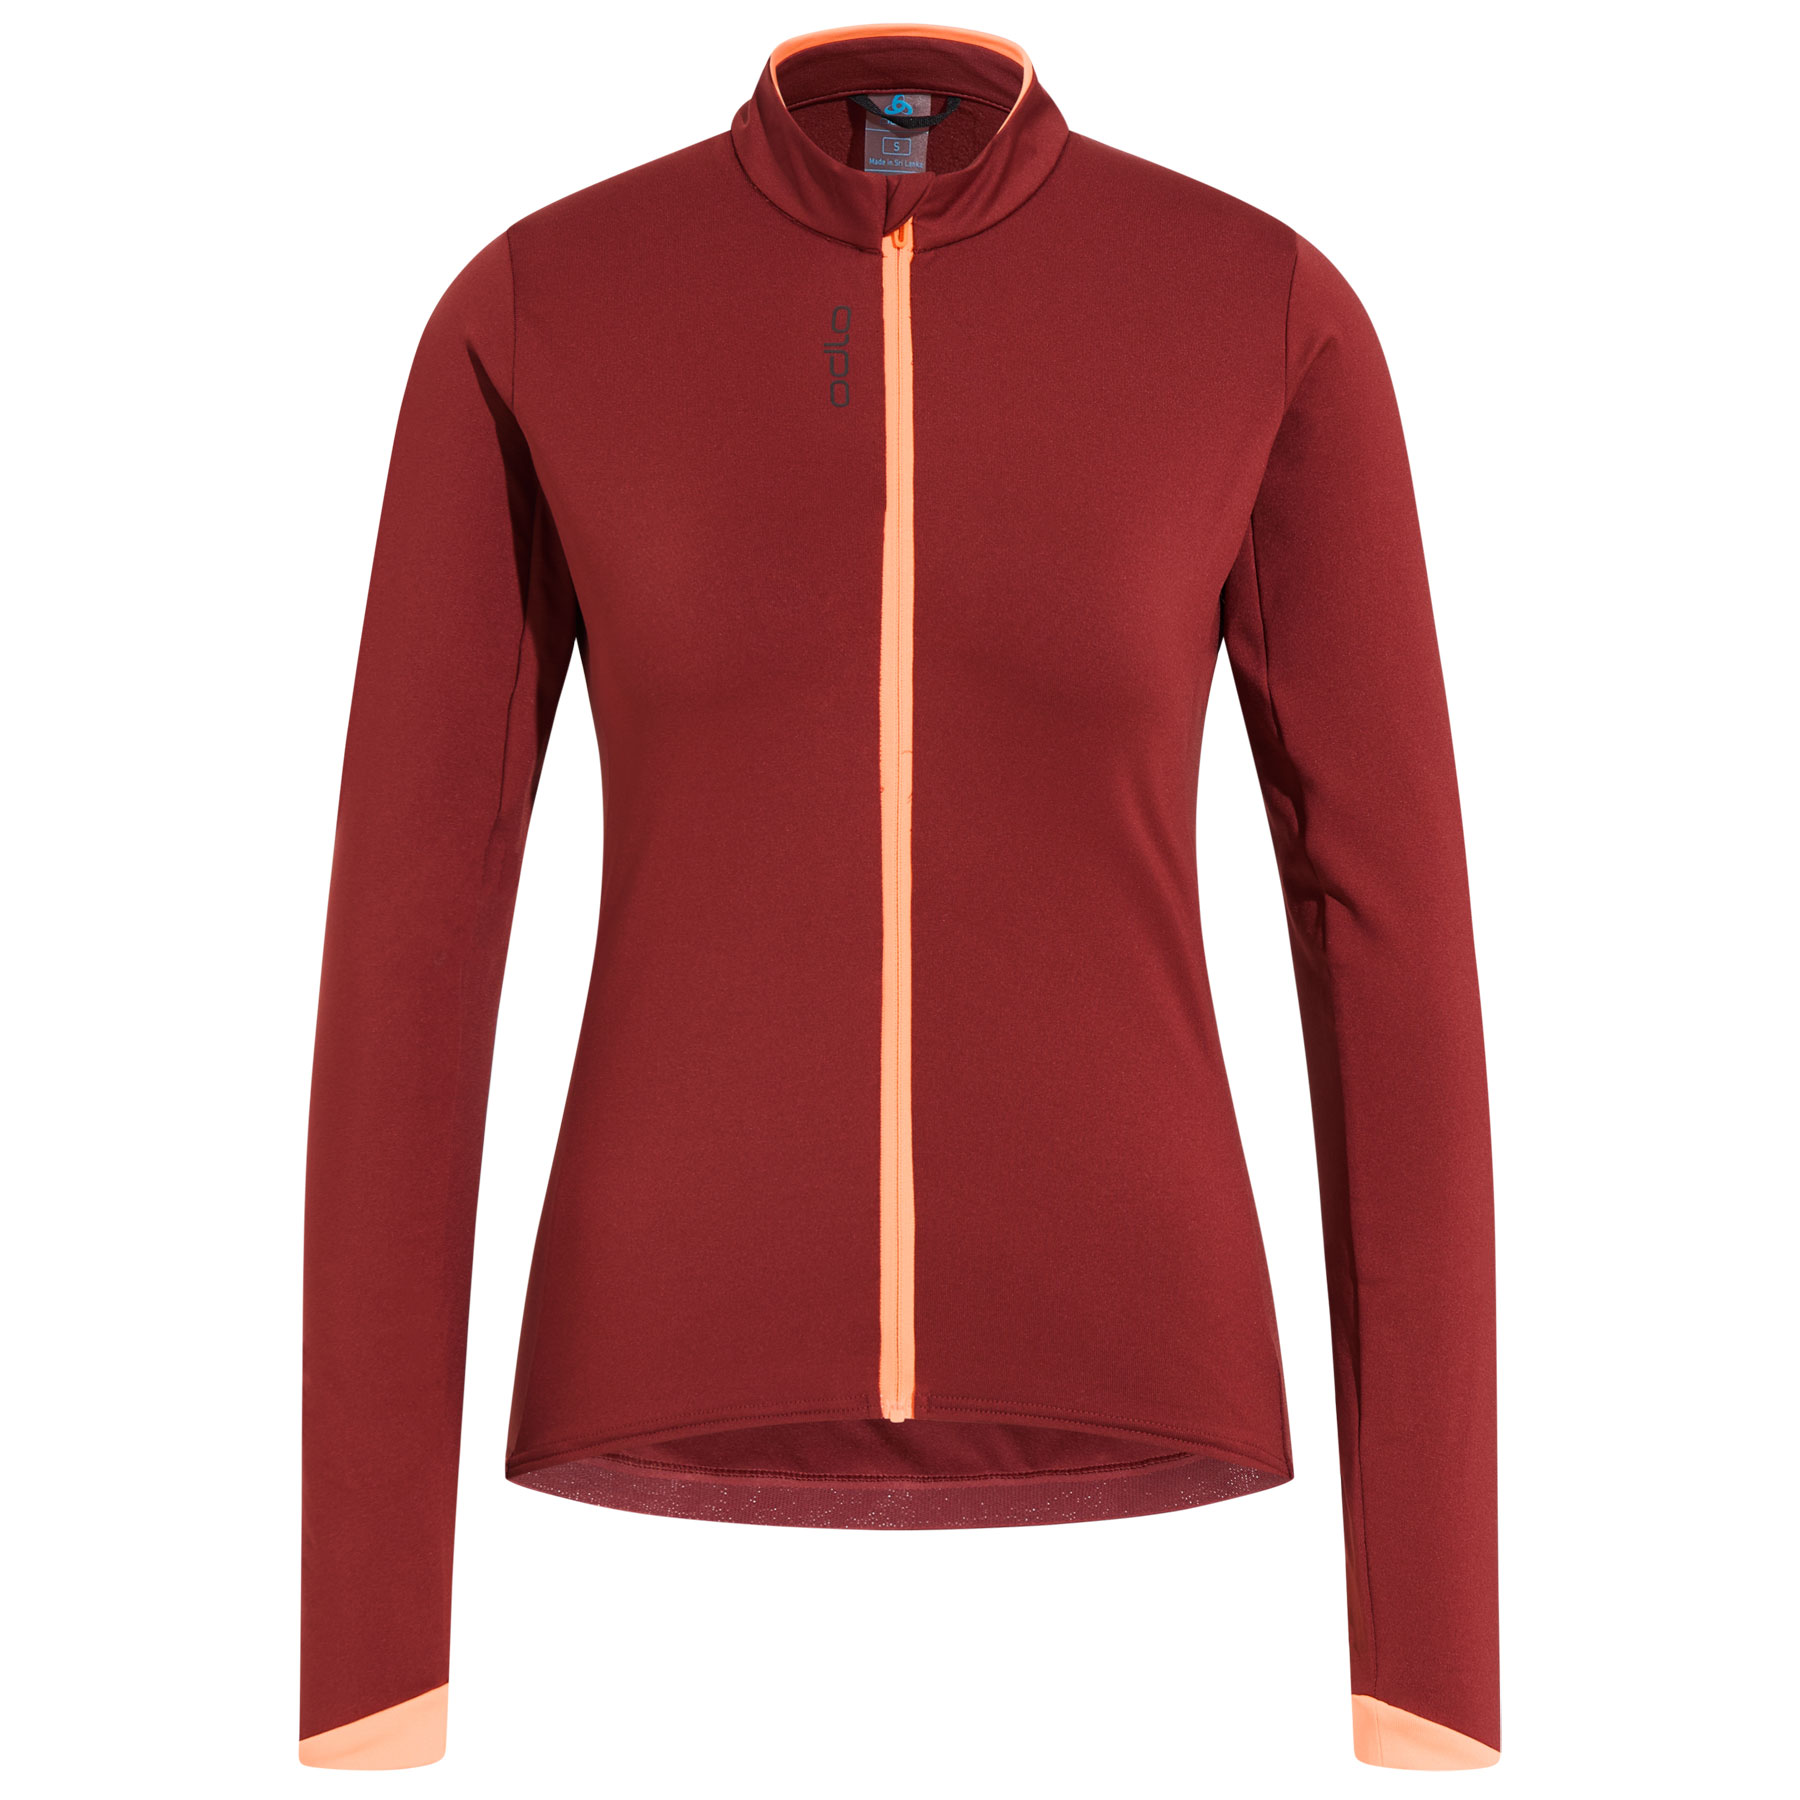 Picture of Odlo Zeroweight Ceramiwarm Mid Layer Jersey Women - spiced apple